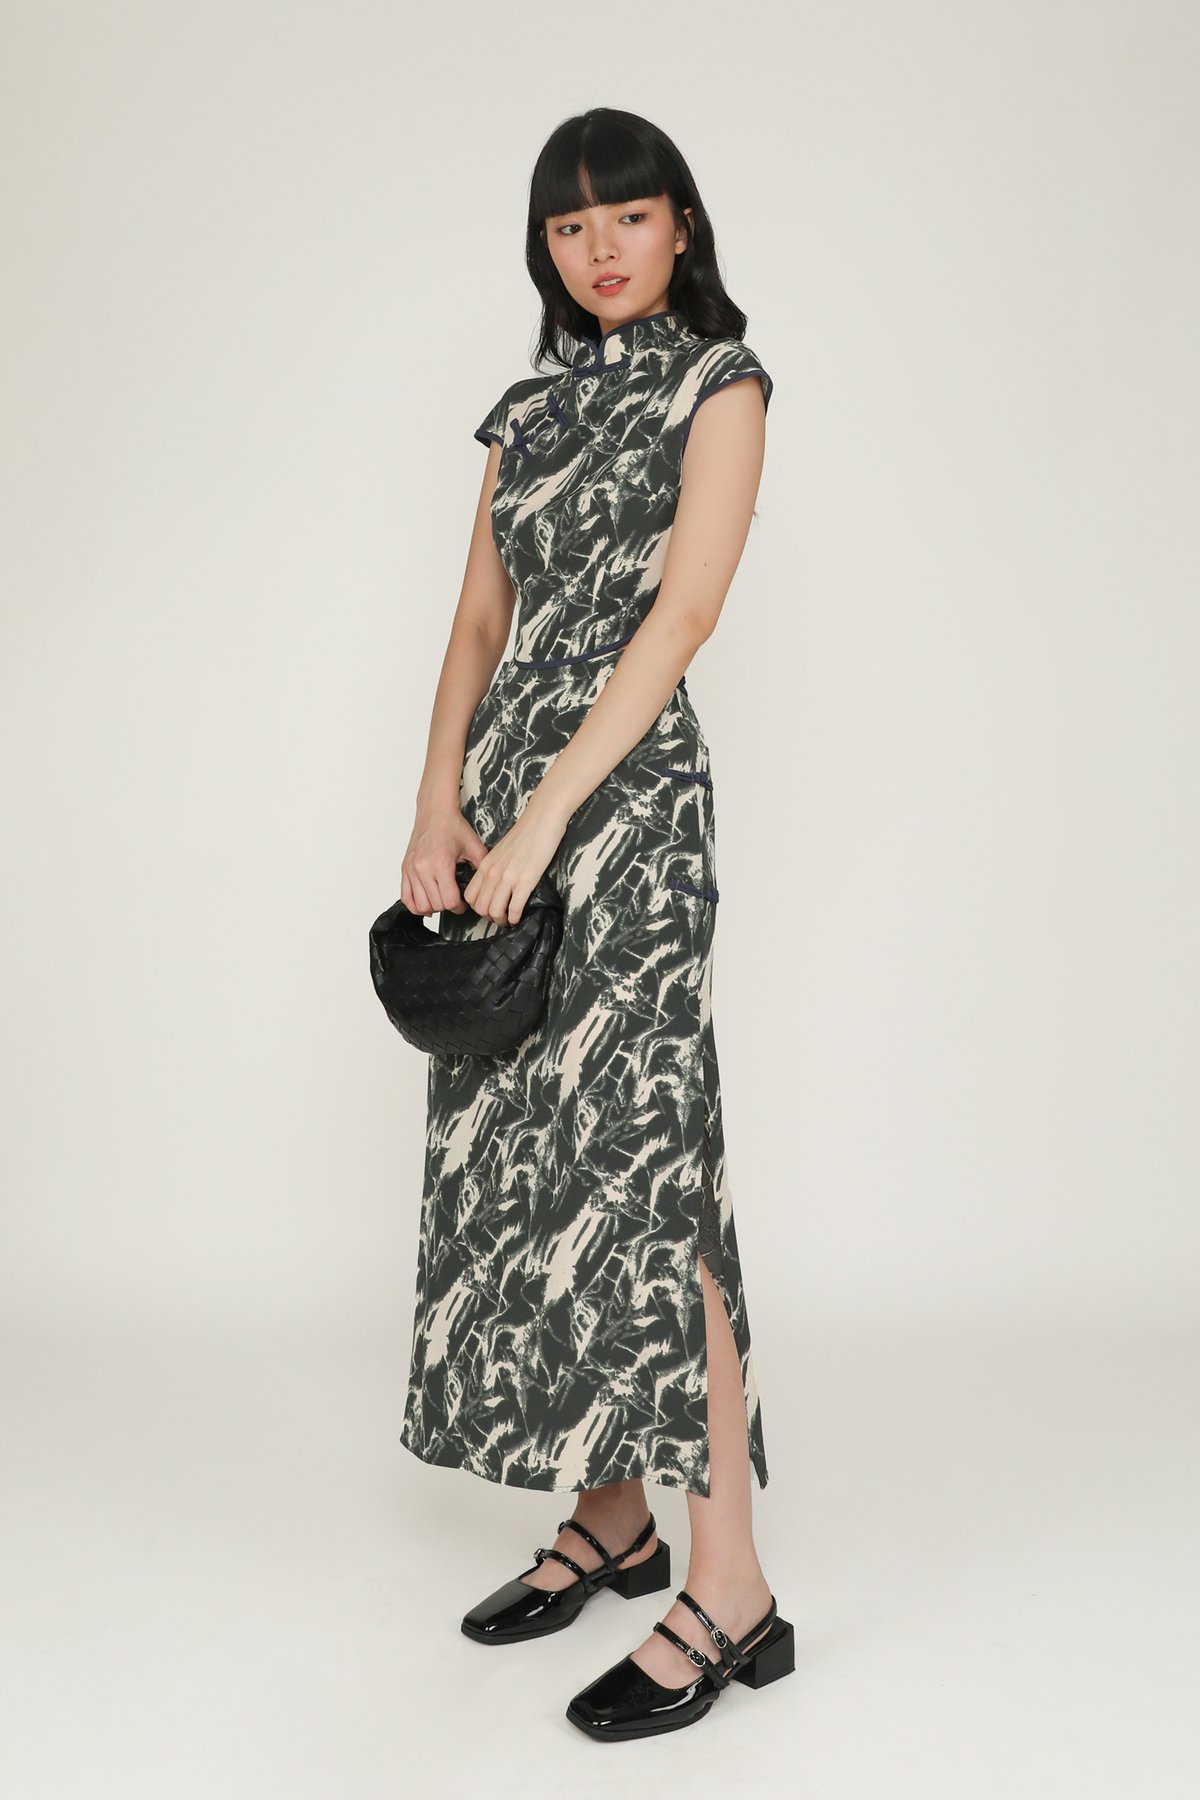 Ming Knotted Maxi Skirt (Printed)